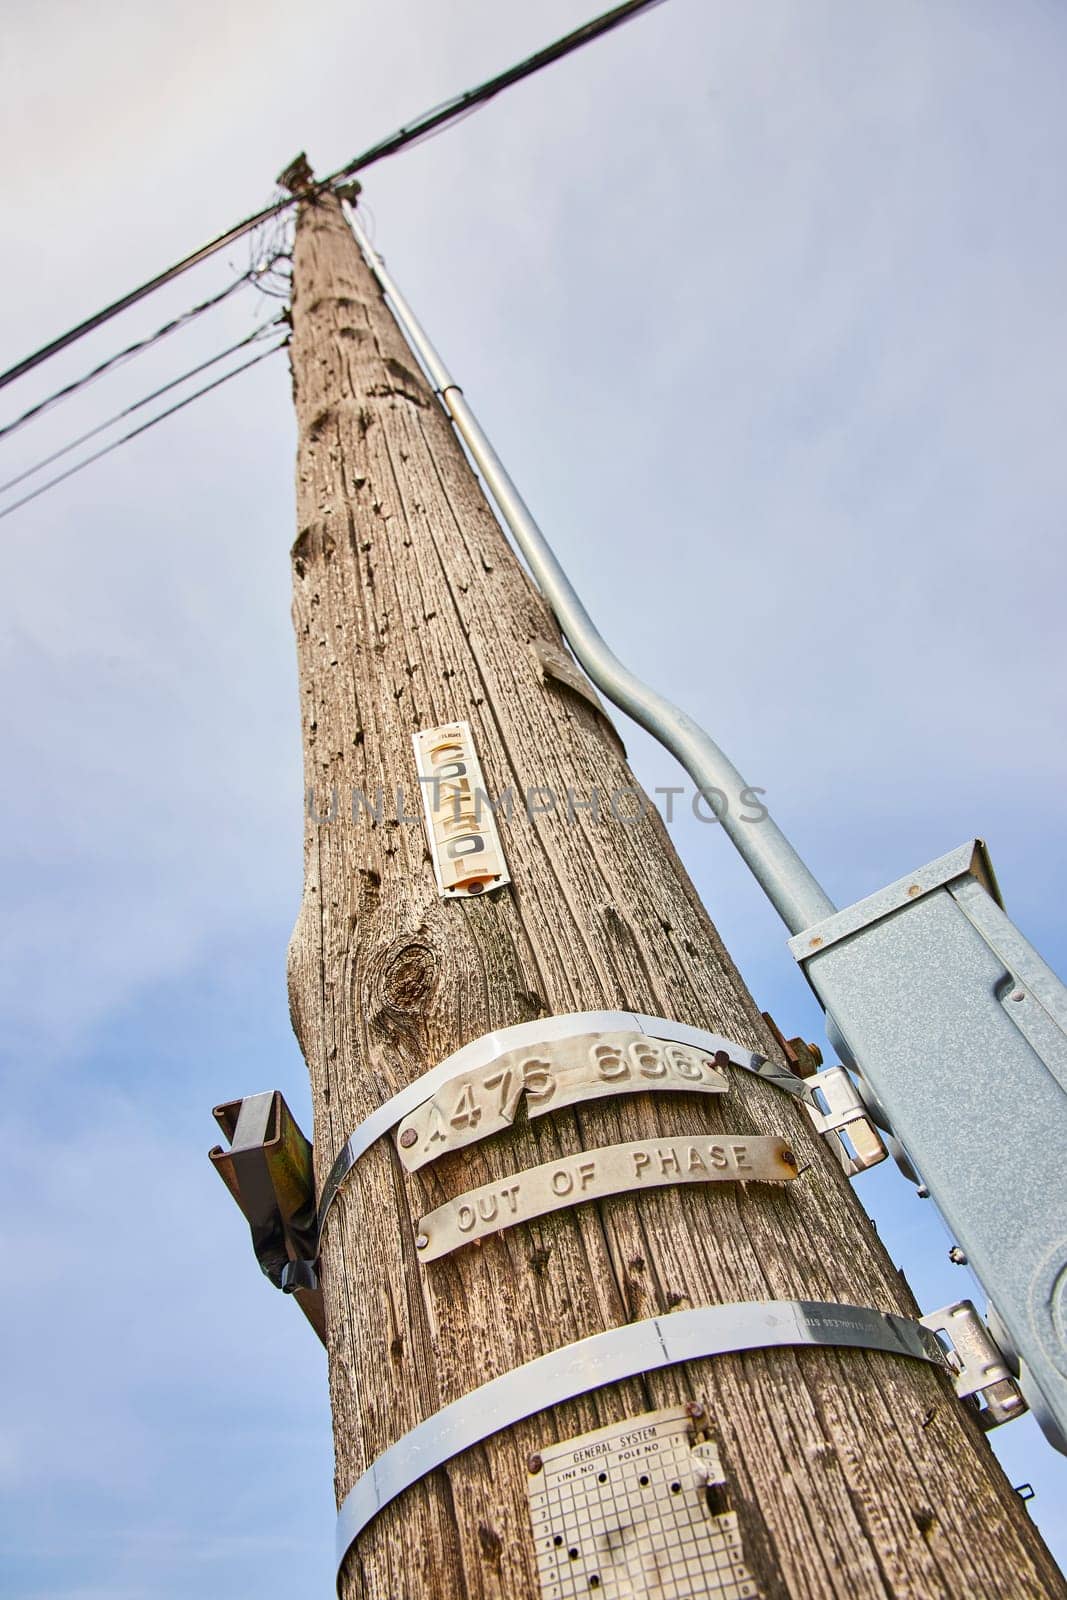 Aging utility pole in Fort Wayne, marked with hazard warnings, under a cloudy sky, symbol of enduring connectivity.